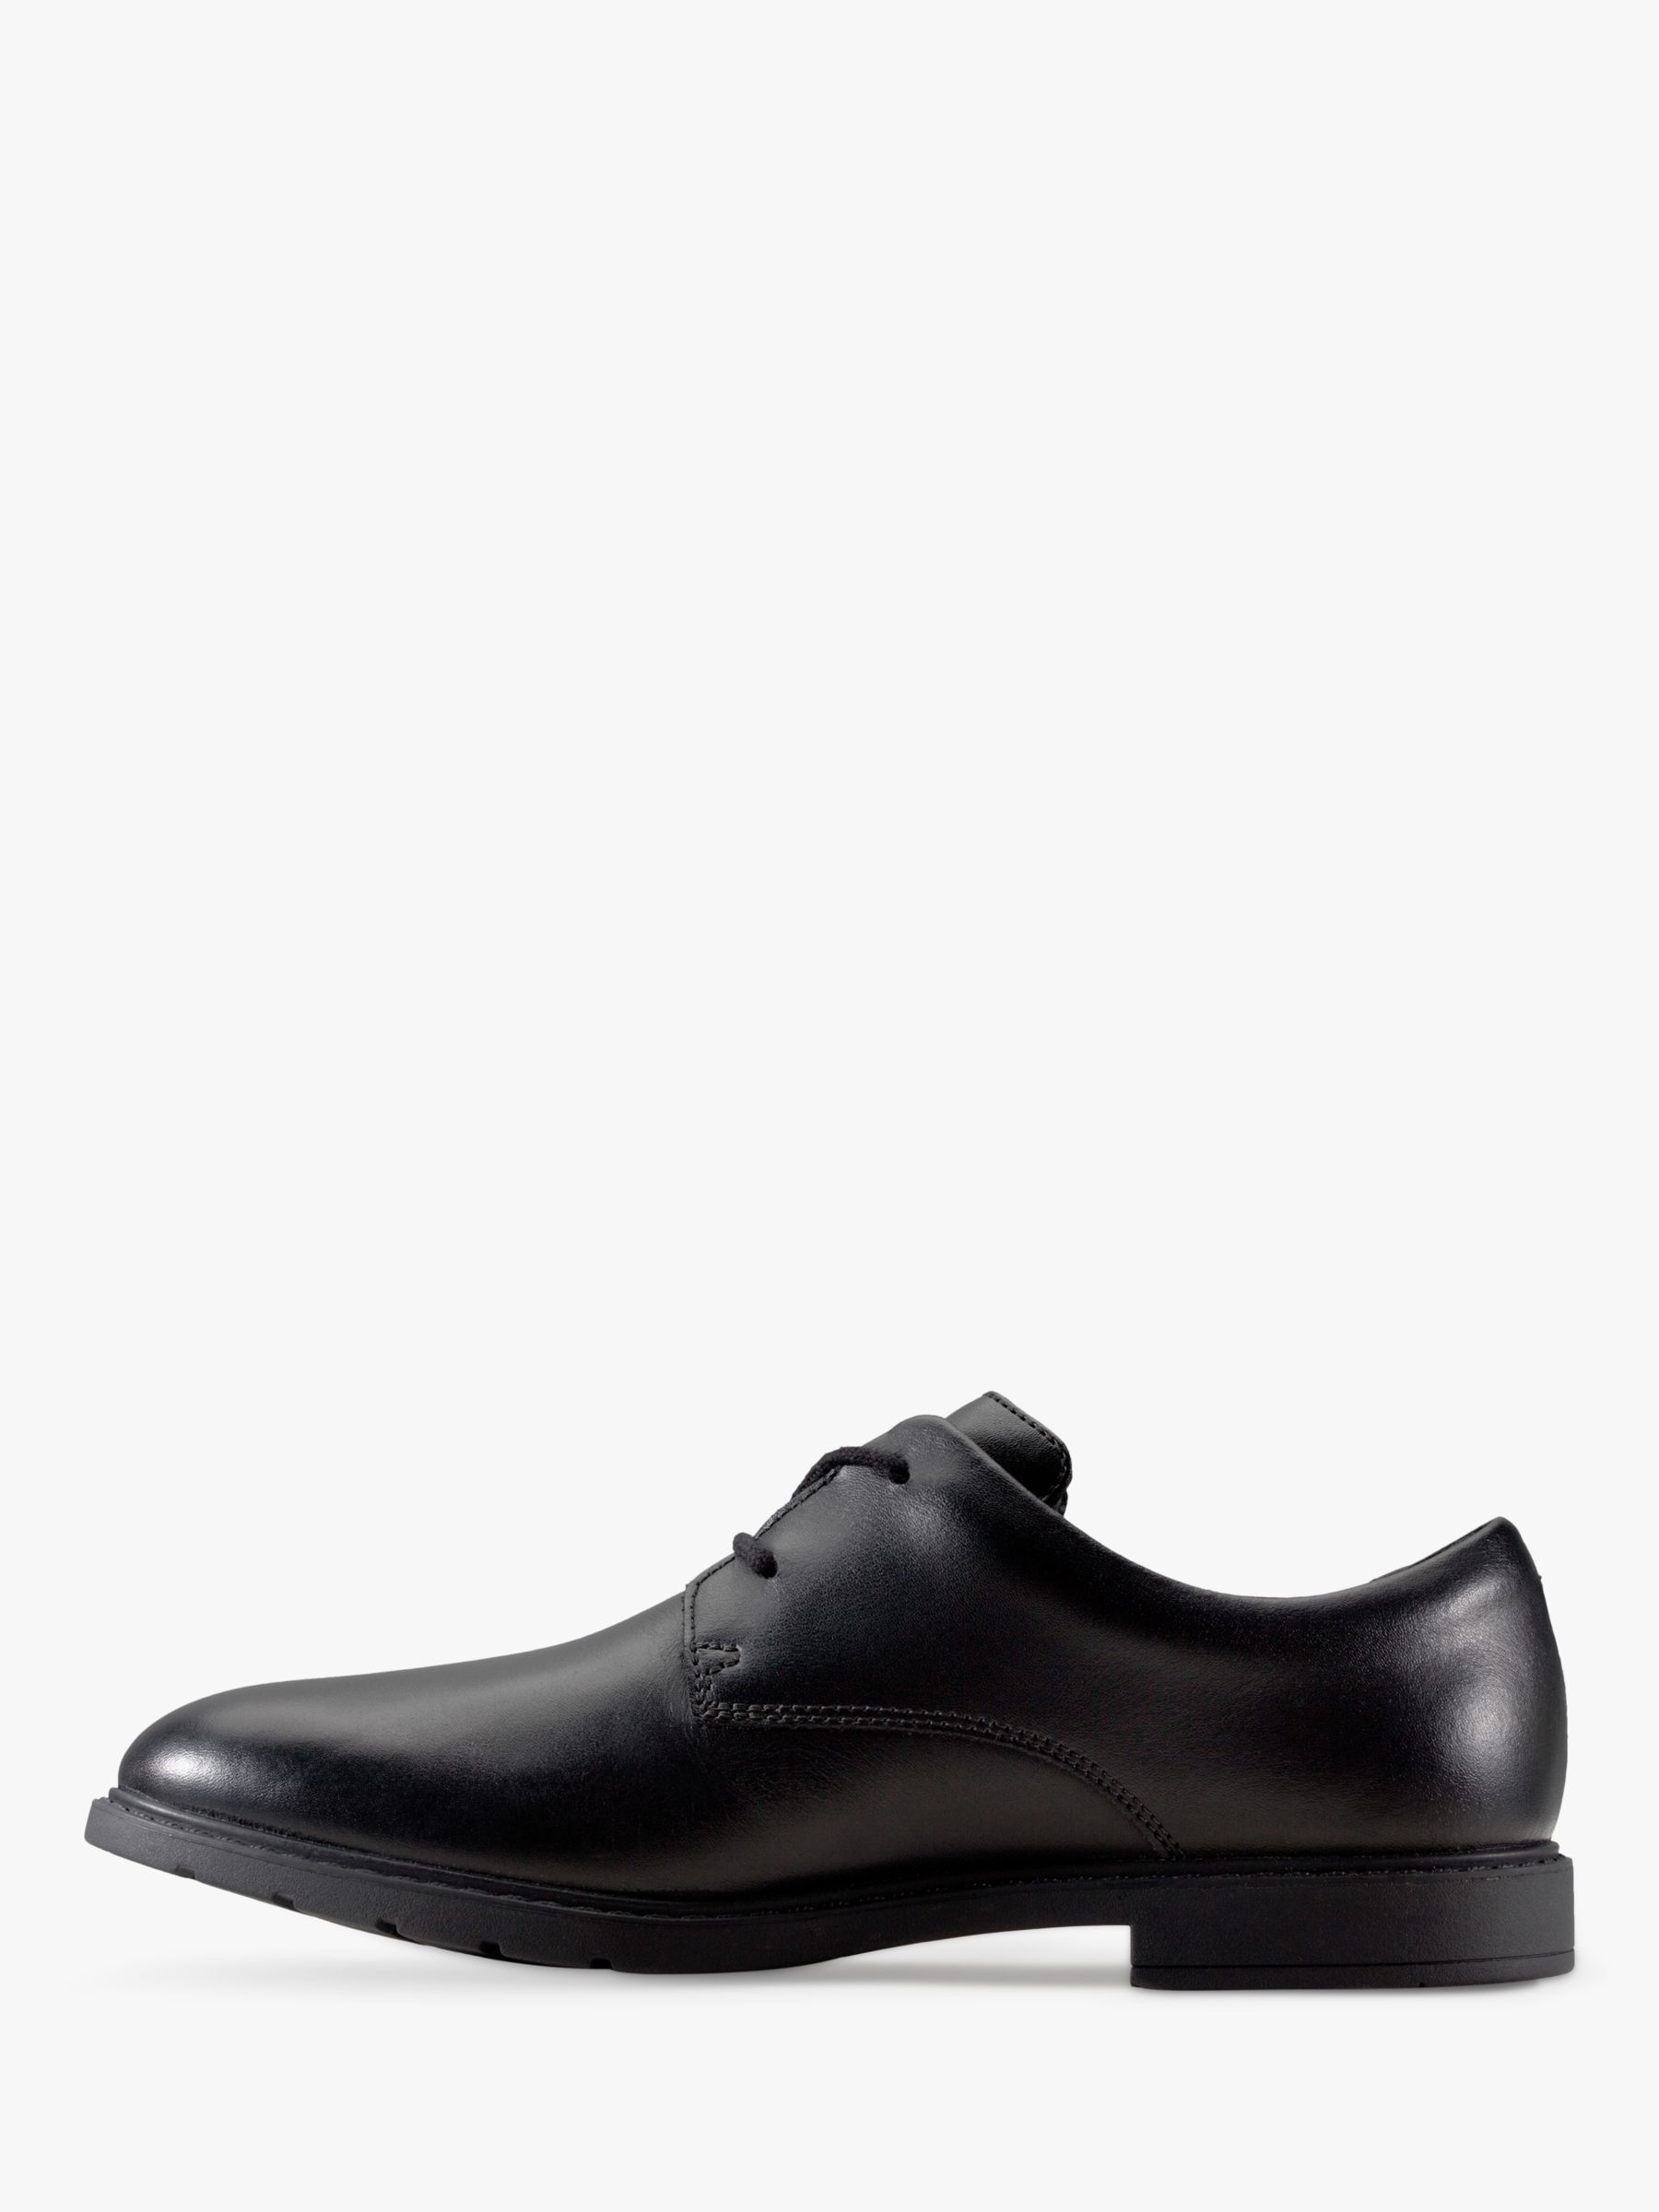 Buy Clarks Kids' Scala Loop Lace Up Leather School Shoes, Black Online at johnlewis.com